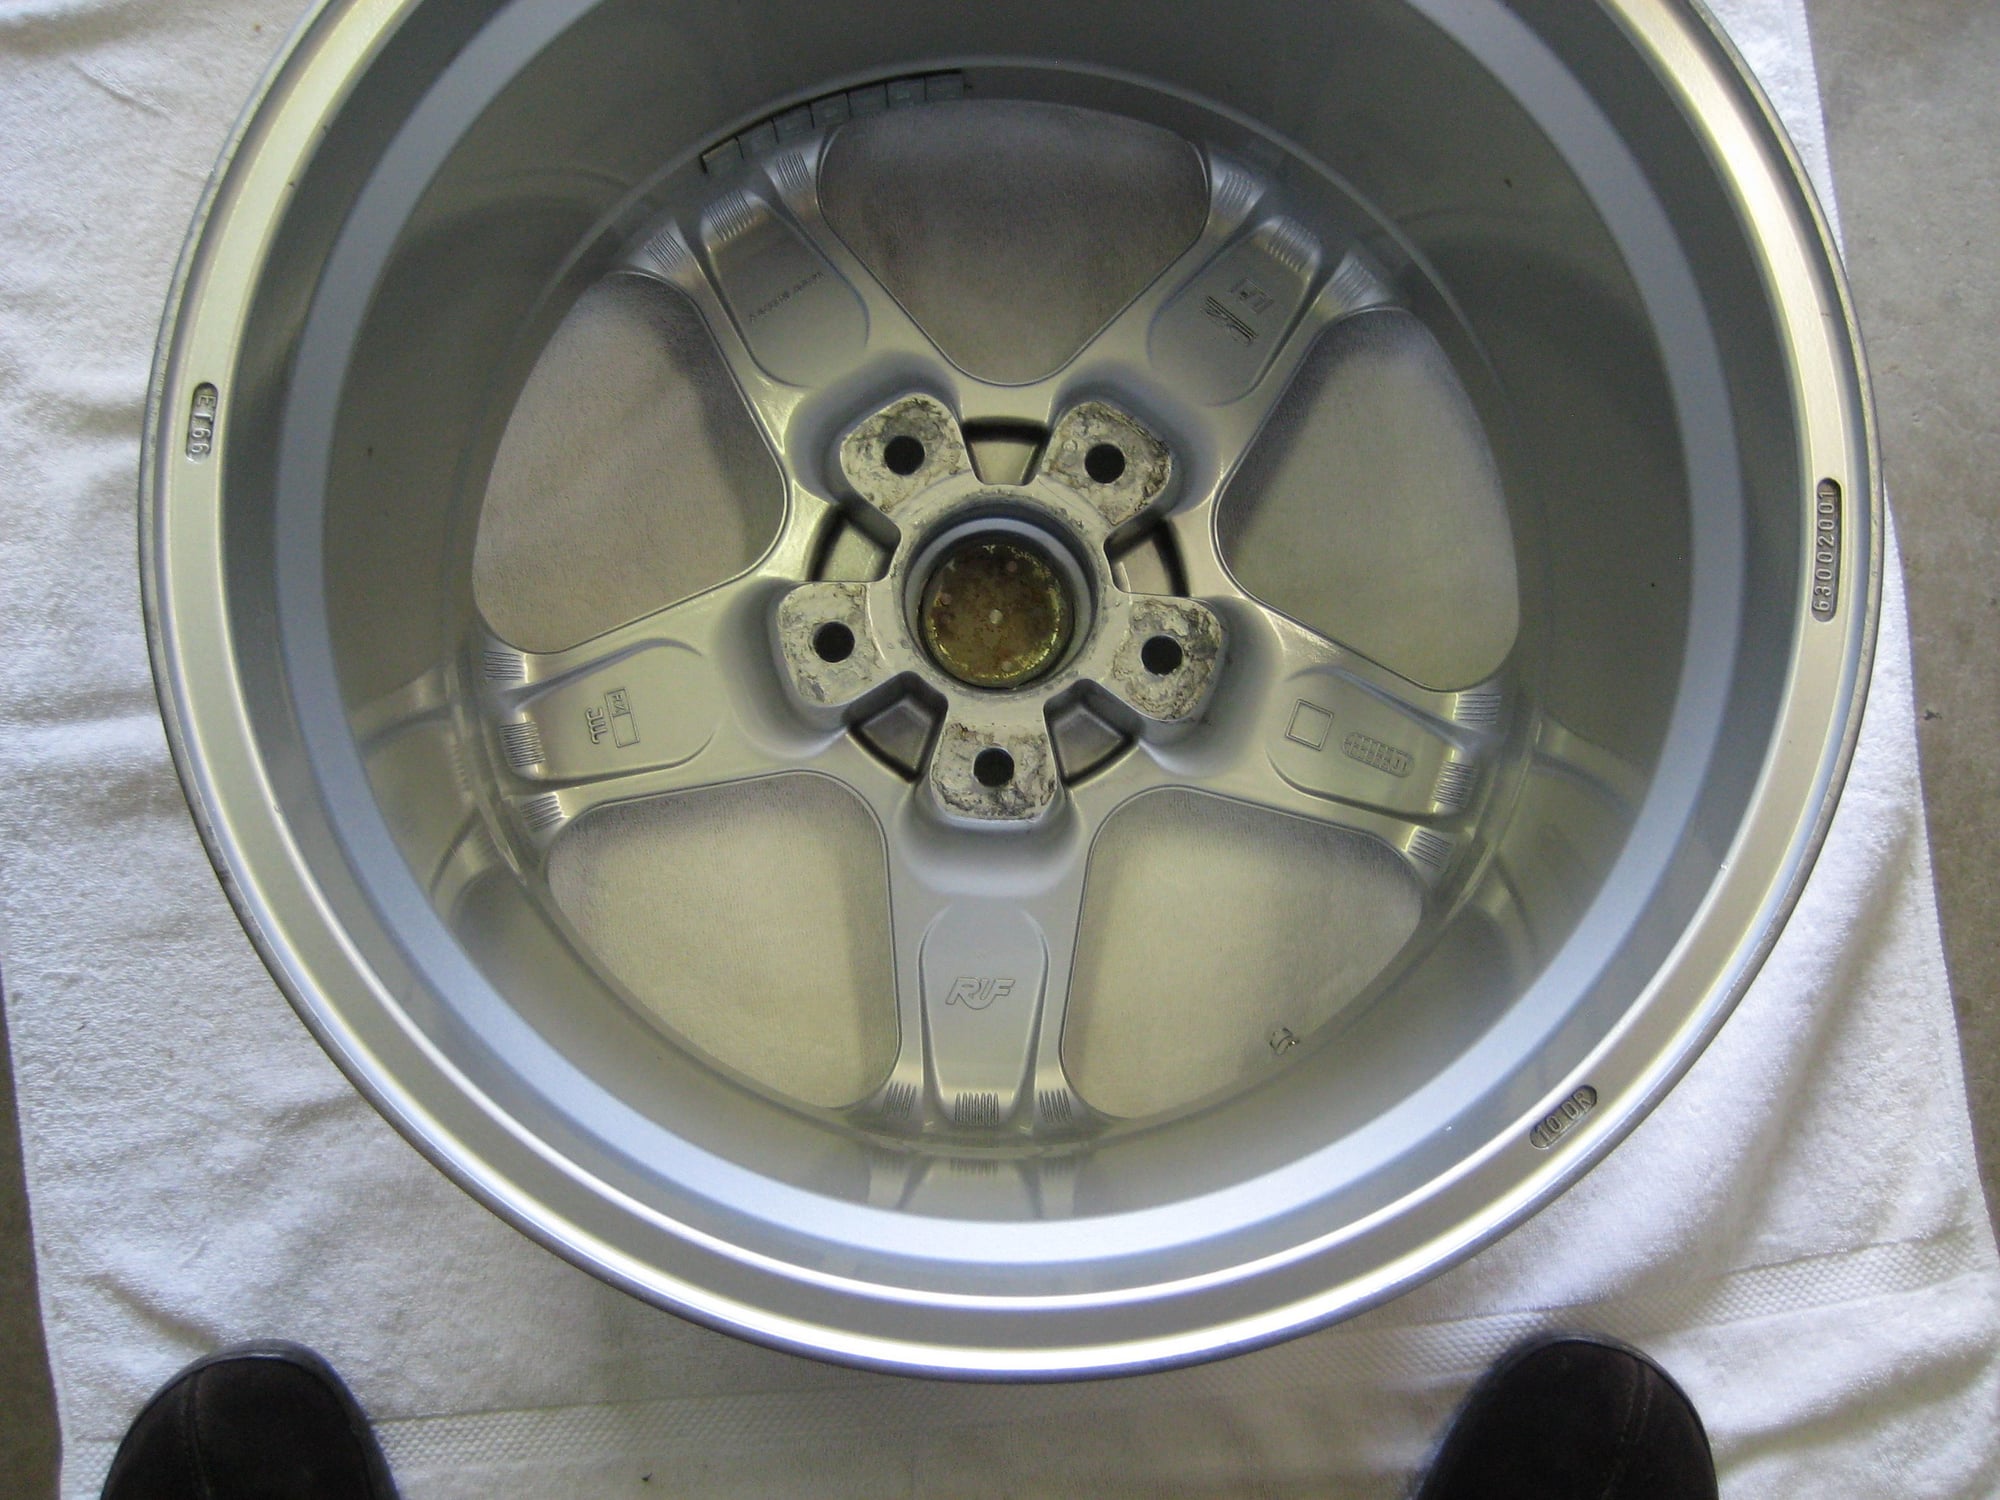 Wheels and Tires/Axles - F/S: GENUINE  RUF 18" Aluminum Wheels -  $2,800 - Used - 1995 to 1998 Porsche 911 - Riverside, CA 92506, United States